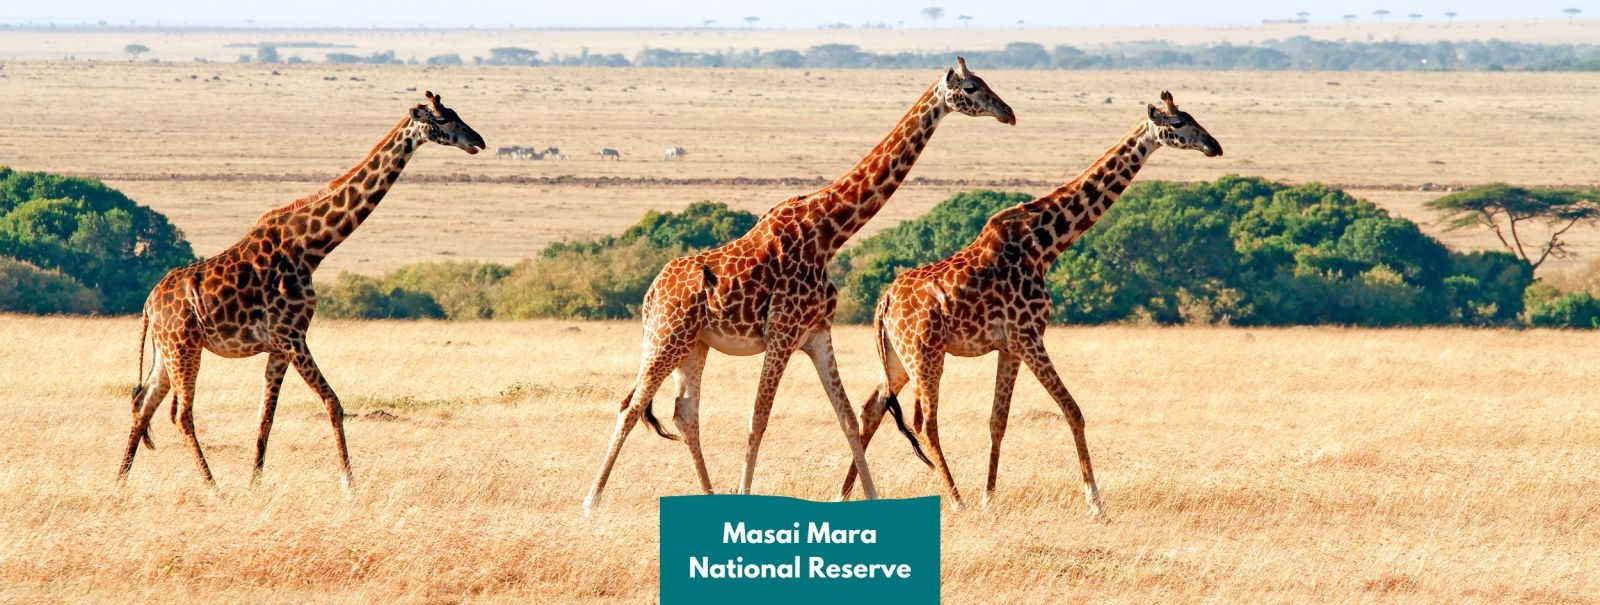 Best time to visit the Masai Mara National Reserve